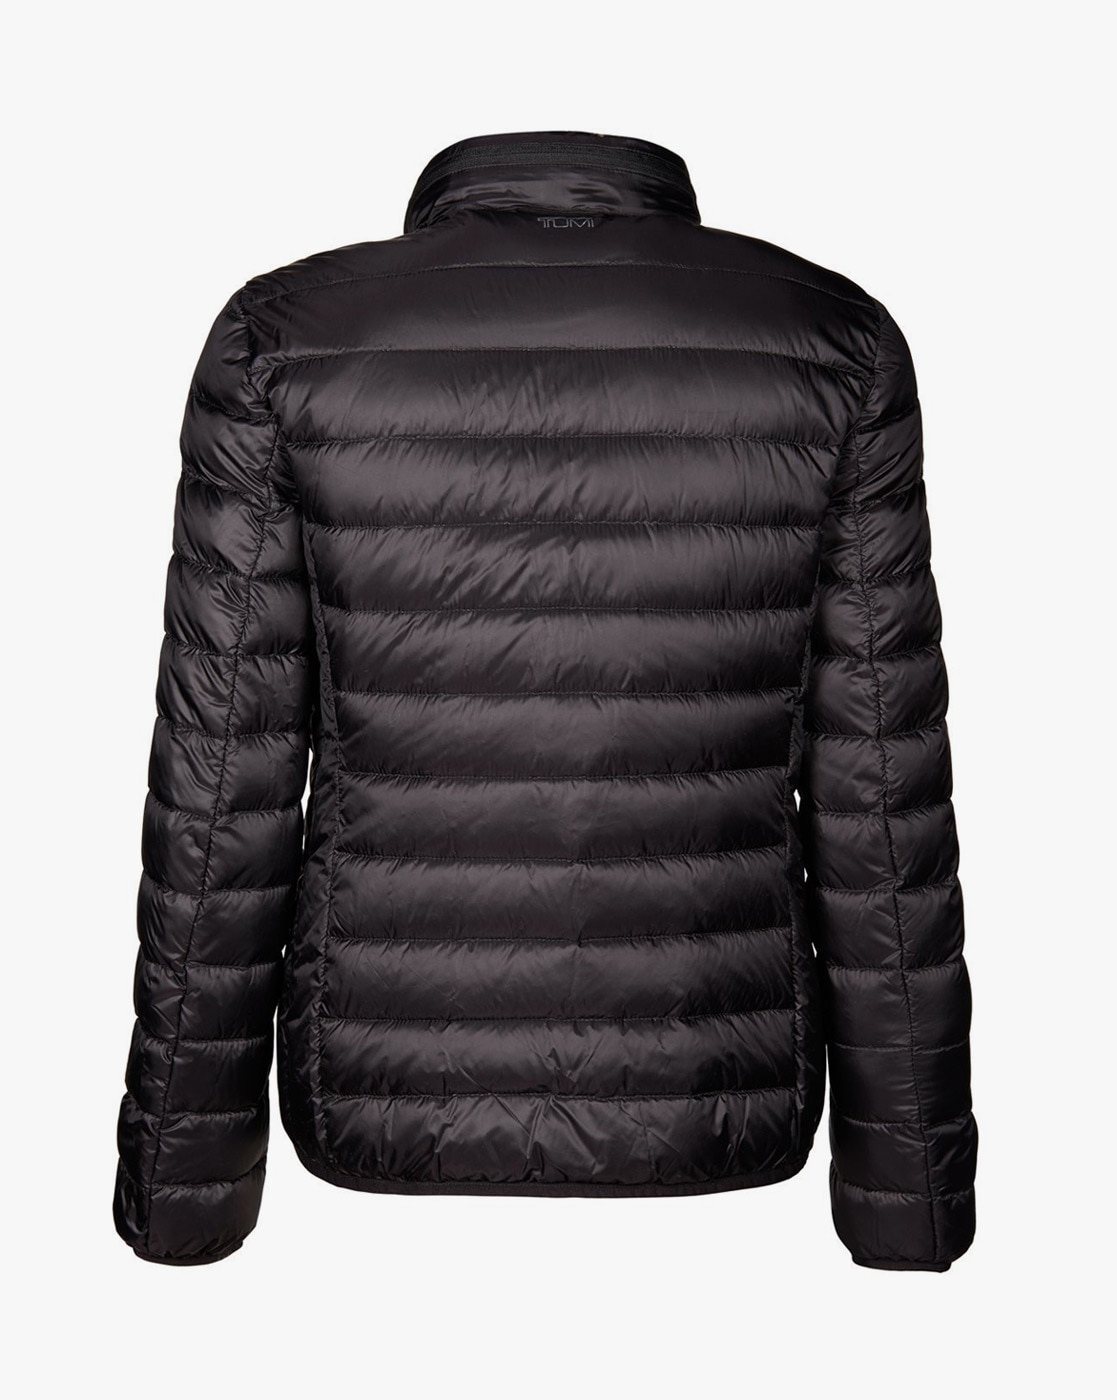 Travelers Love This  Packable Puffer Jacket